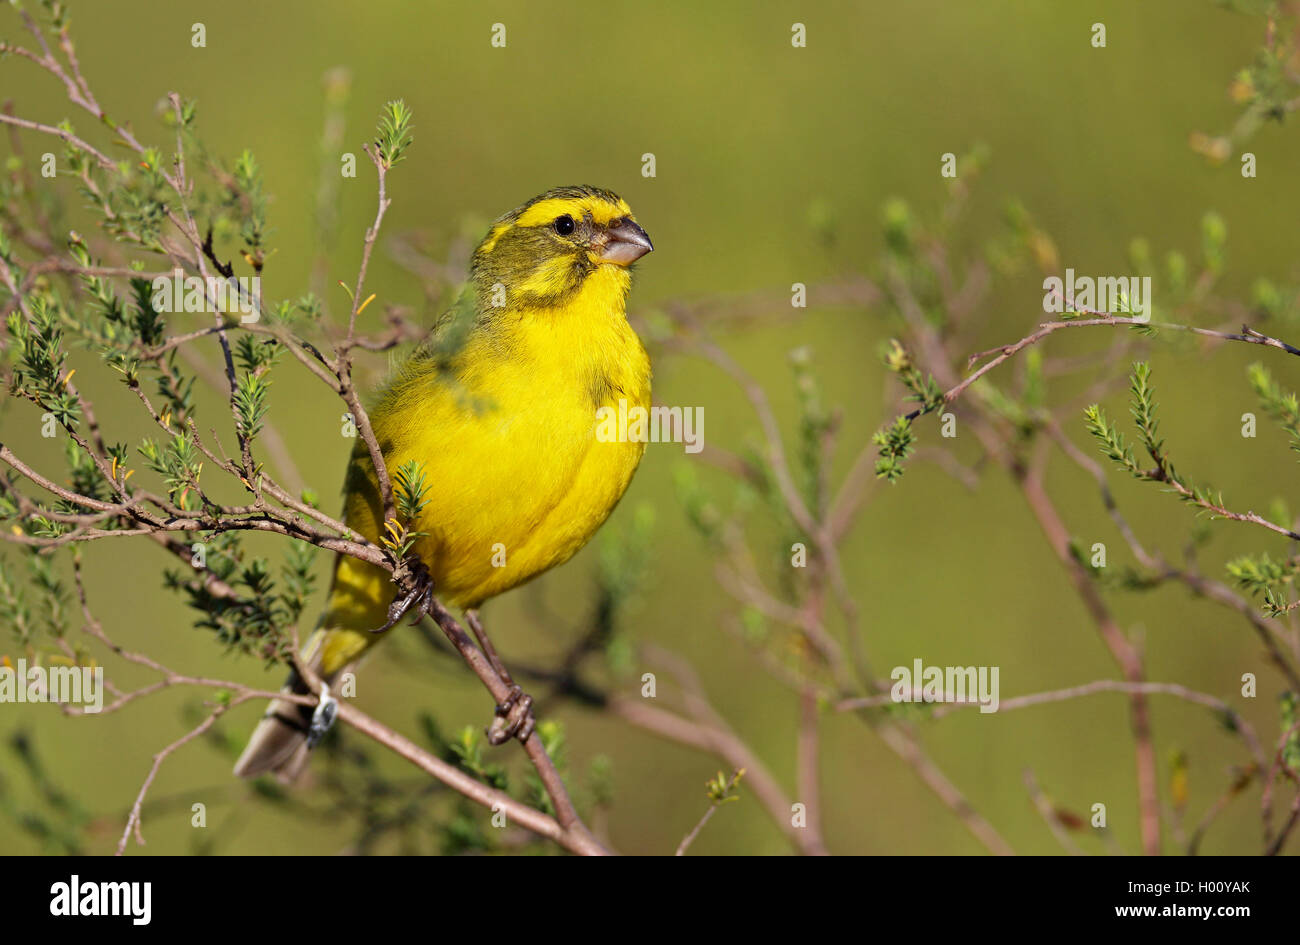 Yellow canary (Serinus flaviventris), male sitting in a shrub, South Africa, Western Cape, Bontebok National Park Stock Photo